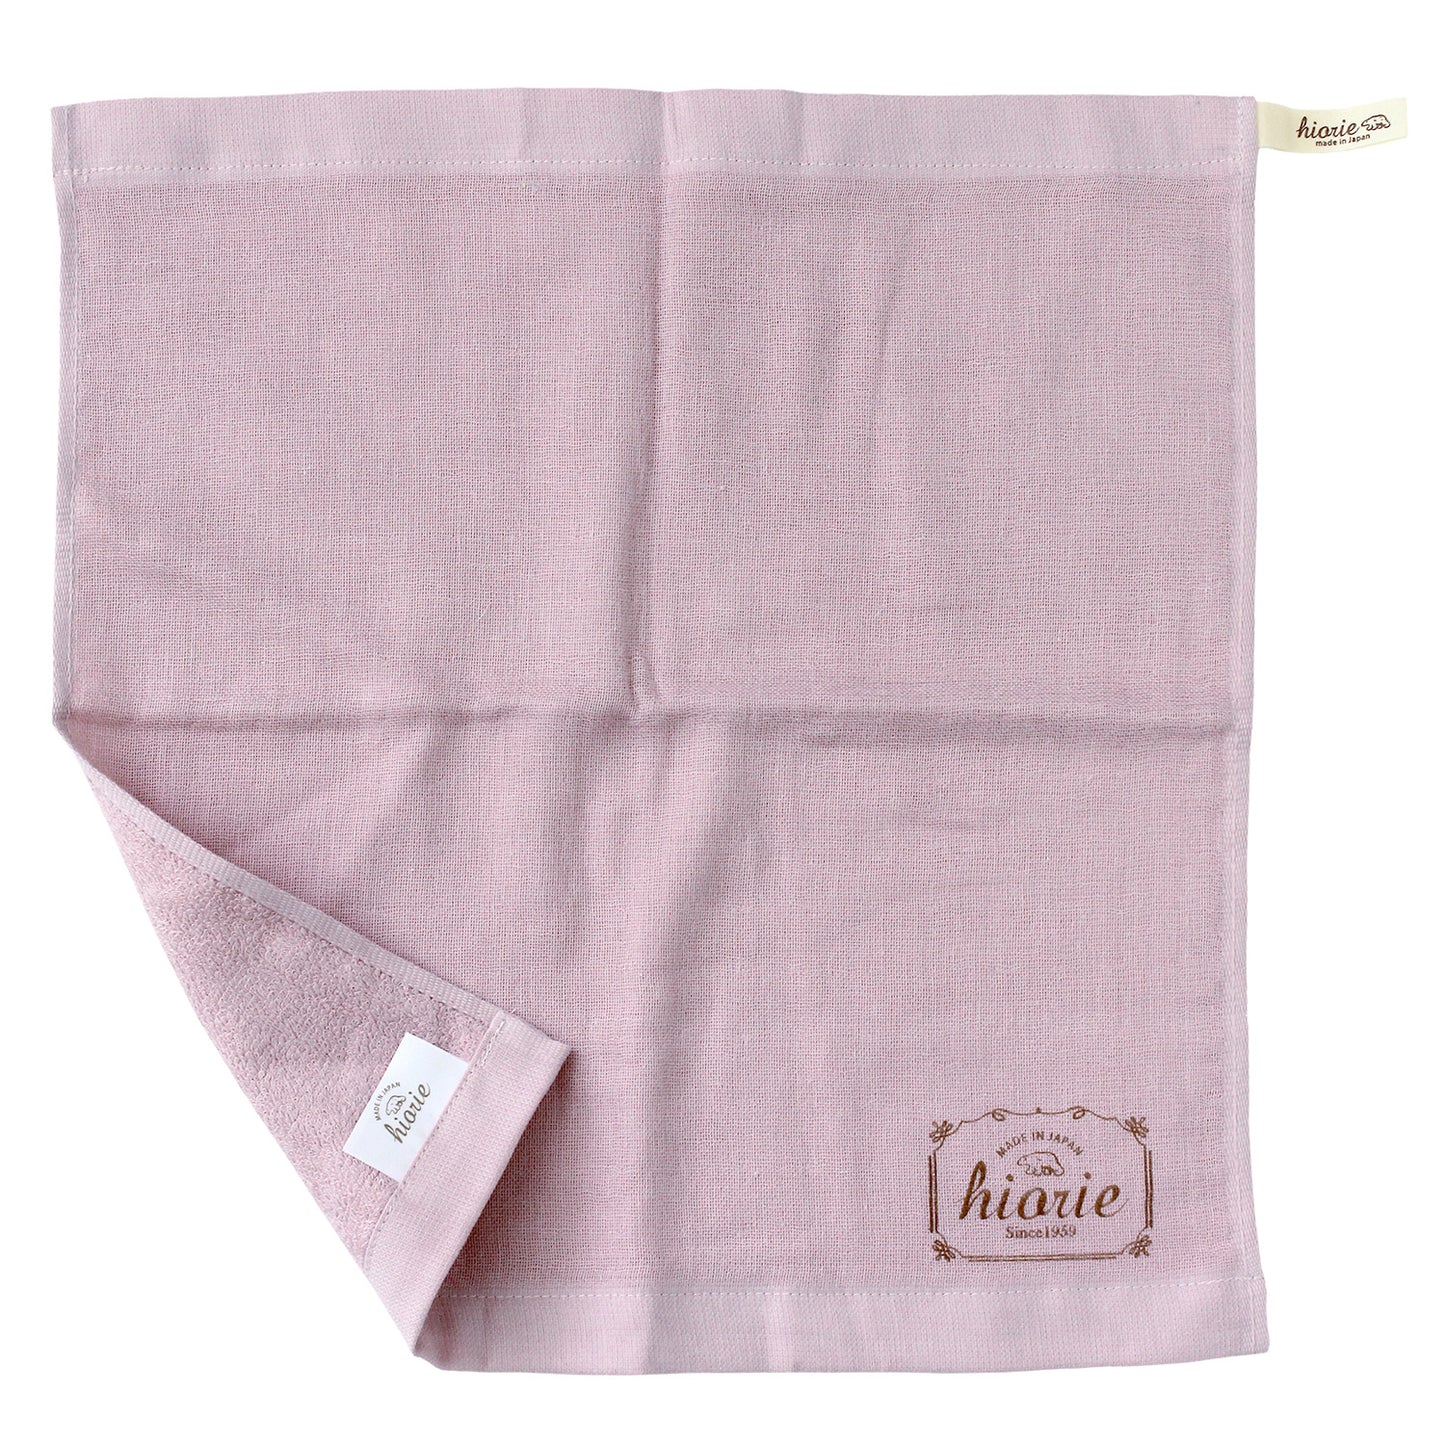 Hiorie Natural Gauze Water-Absorption Quick Drying Hand Towel 100% cotton Japan